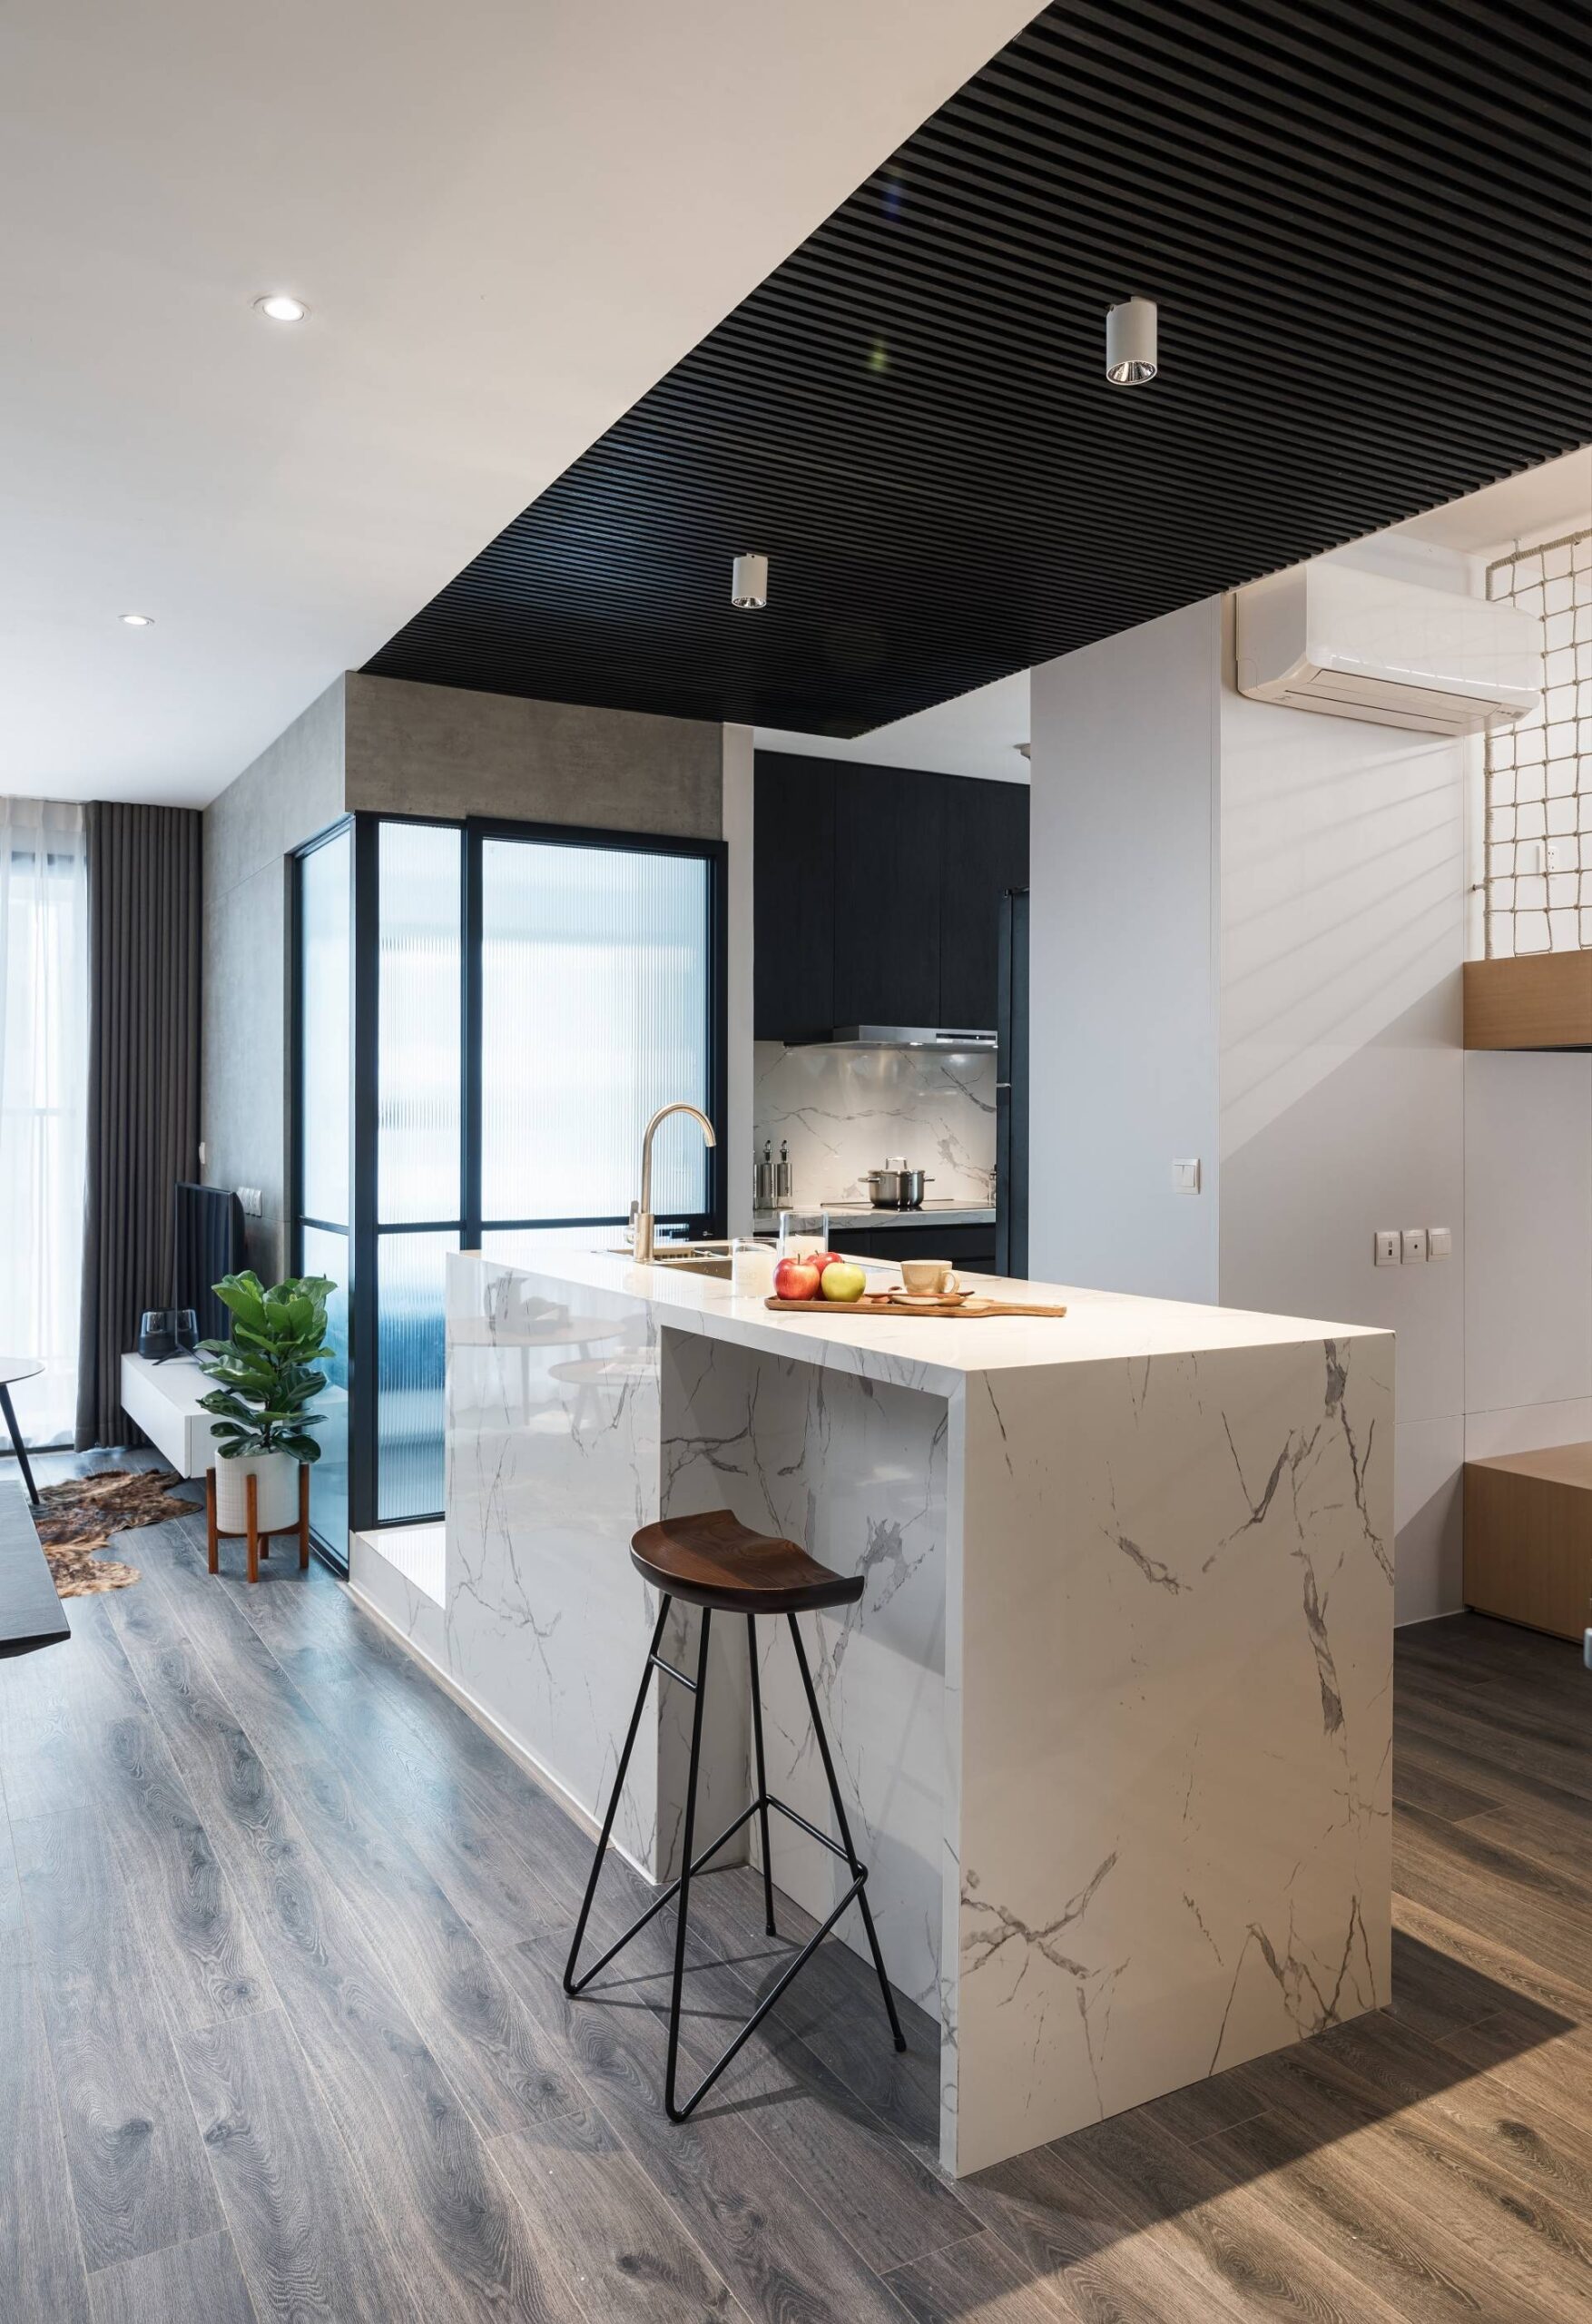 For kitchen area, the architect uses white marble to make a contrast with black wood on the dark gray floor creating a perfect highlight for the whole apartment.